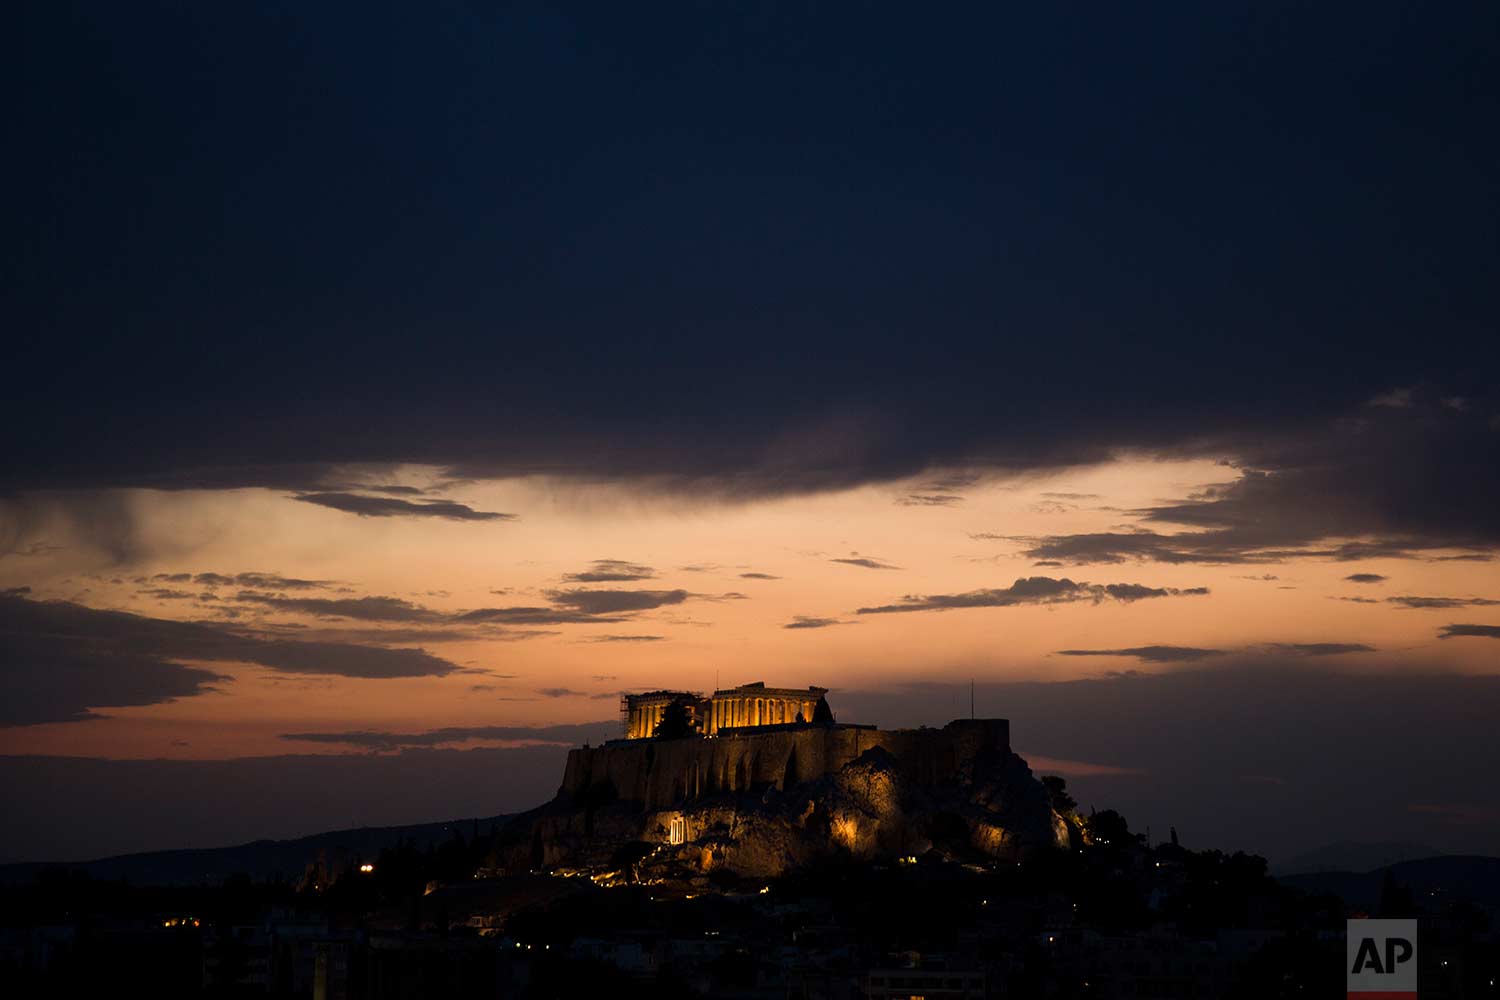  Clouds cover the Athenian sky as the ancient Acropolis hill and the ruins of the fifth century B.C. Parthenon temple are illuminated on Tuesday, Aug. 29, 2017. (AP Photo/Petros Giannakouris) 